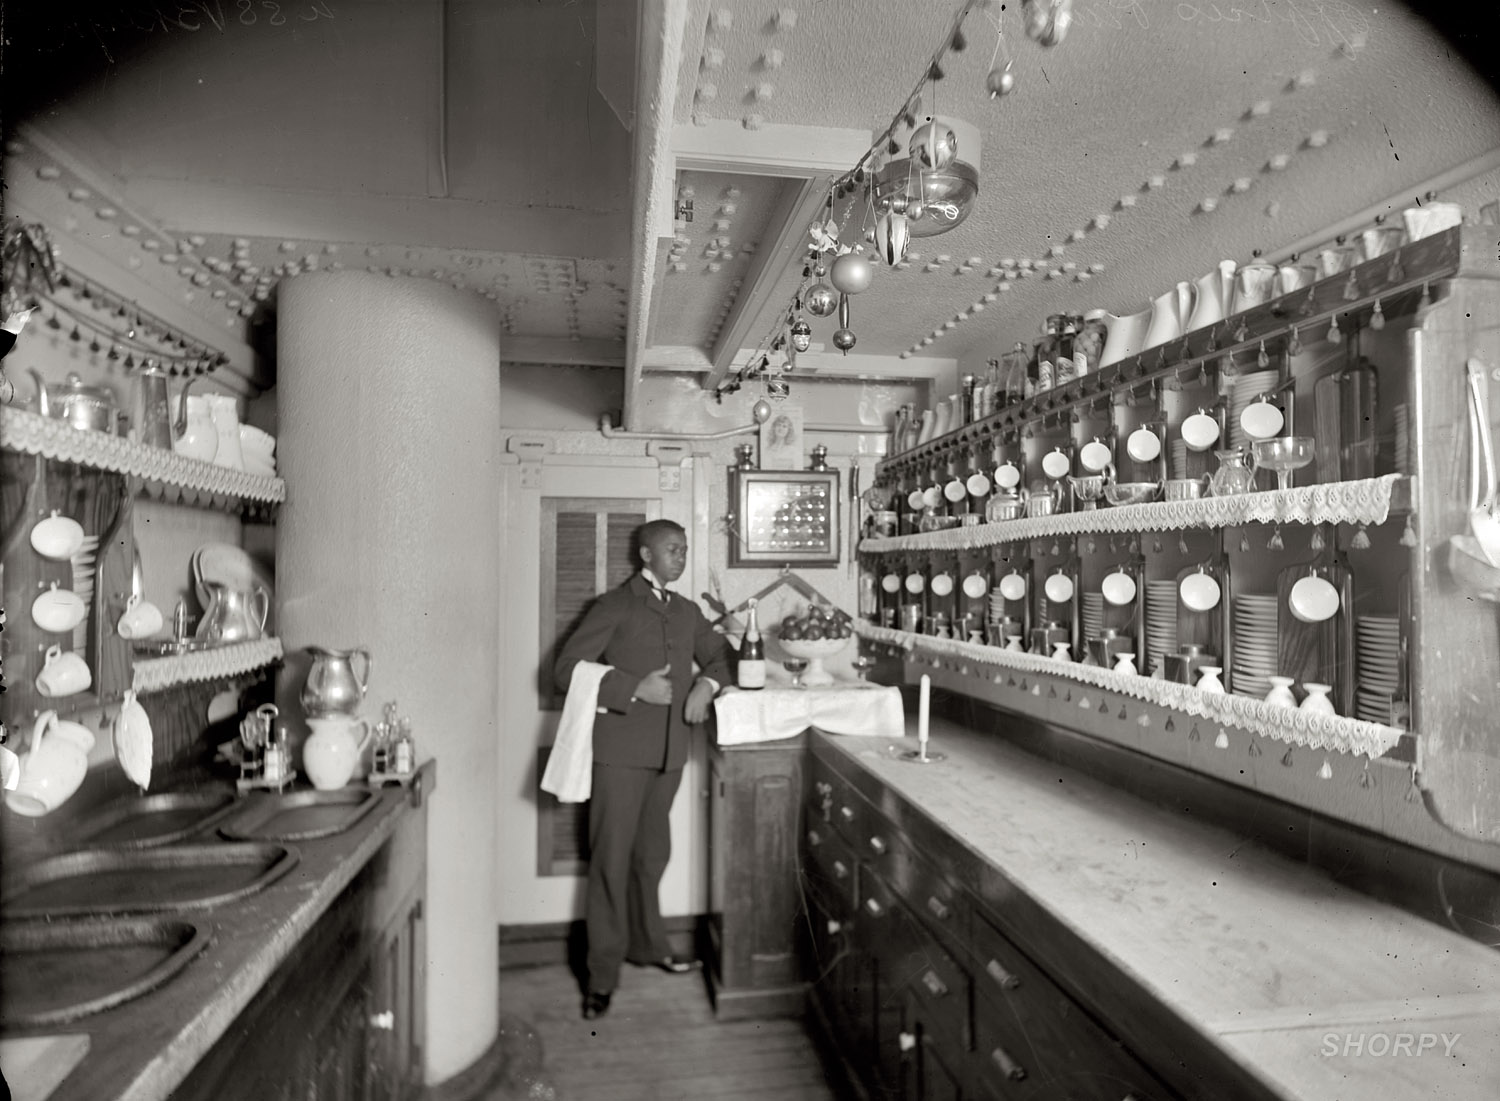 Circa 1900. "U.S.S. Brooklyn wardroom pantry." Note the holiday decorations. The cruiser Brooklyn, commissioned in 1896, was a flagship in the Spanish-American War. Detroit Publishing Co. glass negative. View full size.